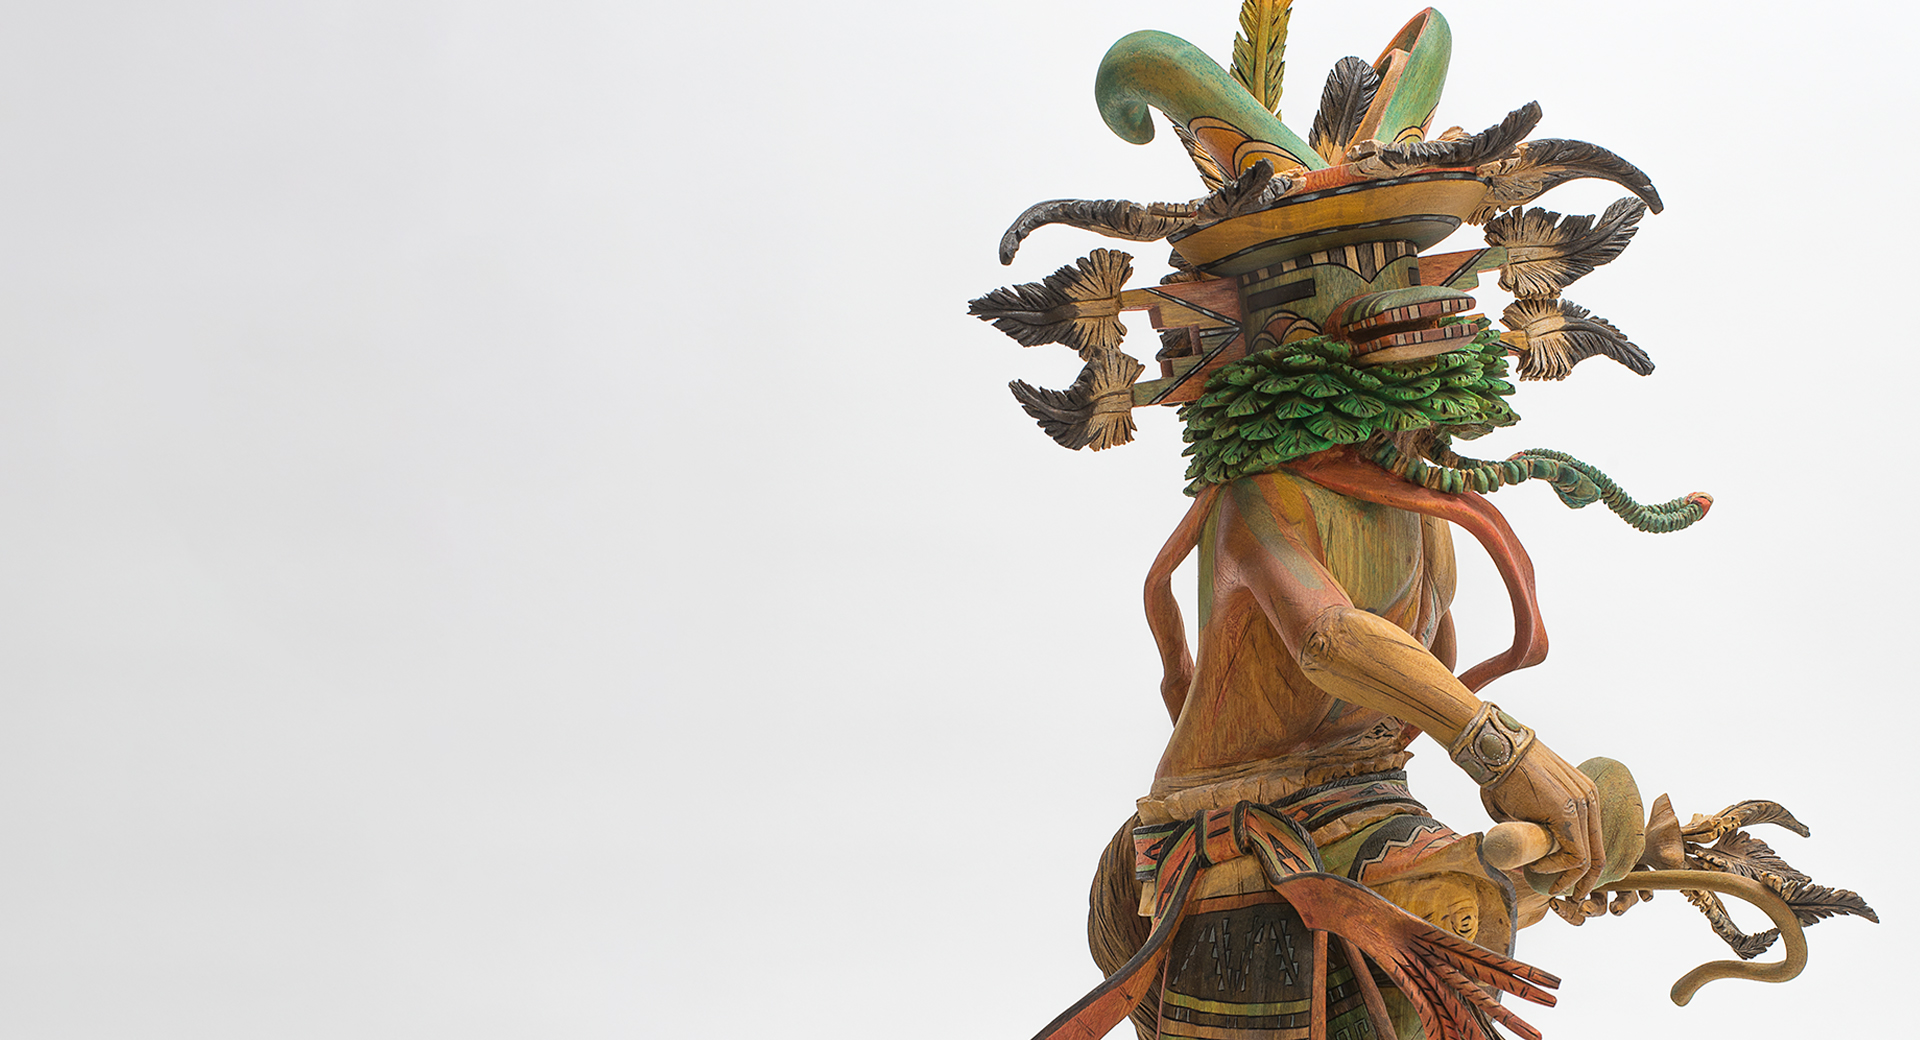 A wooden sculpture of a figure with green and orange feathers and robes.